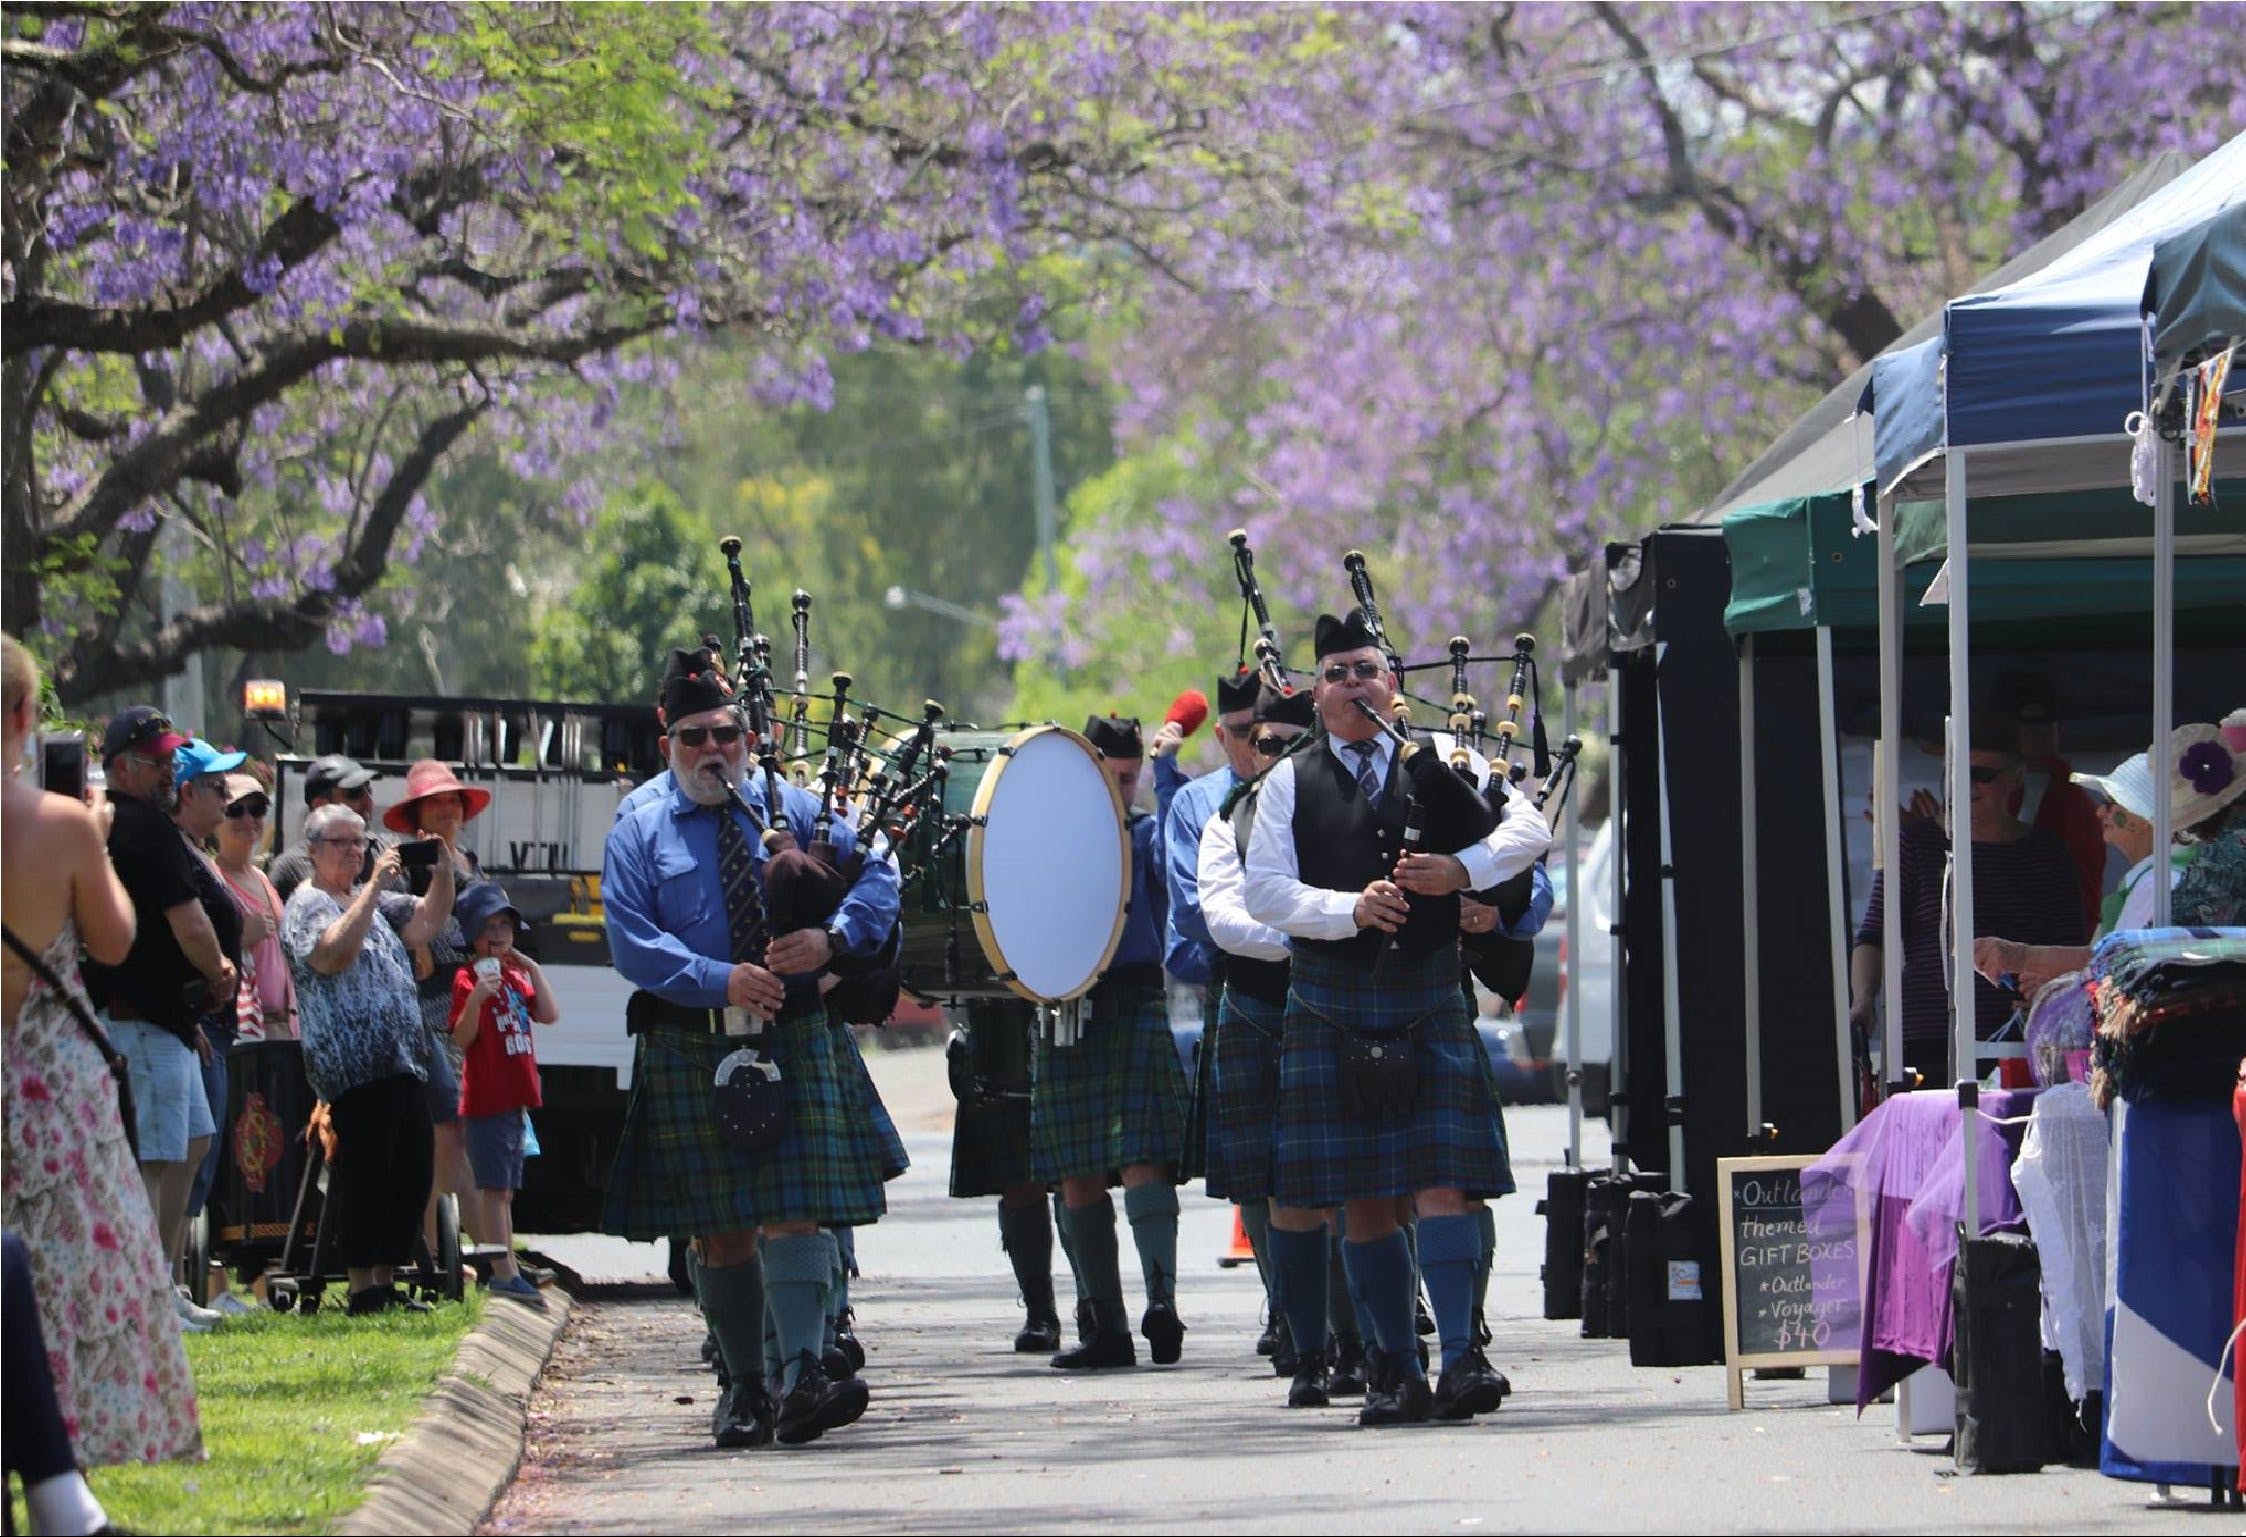 Celtic Festival of Queensland - WA Accommodation